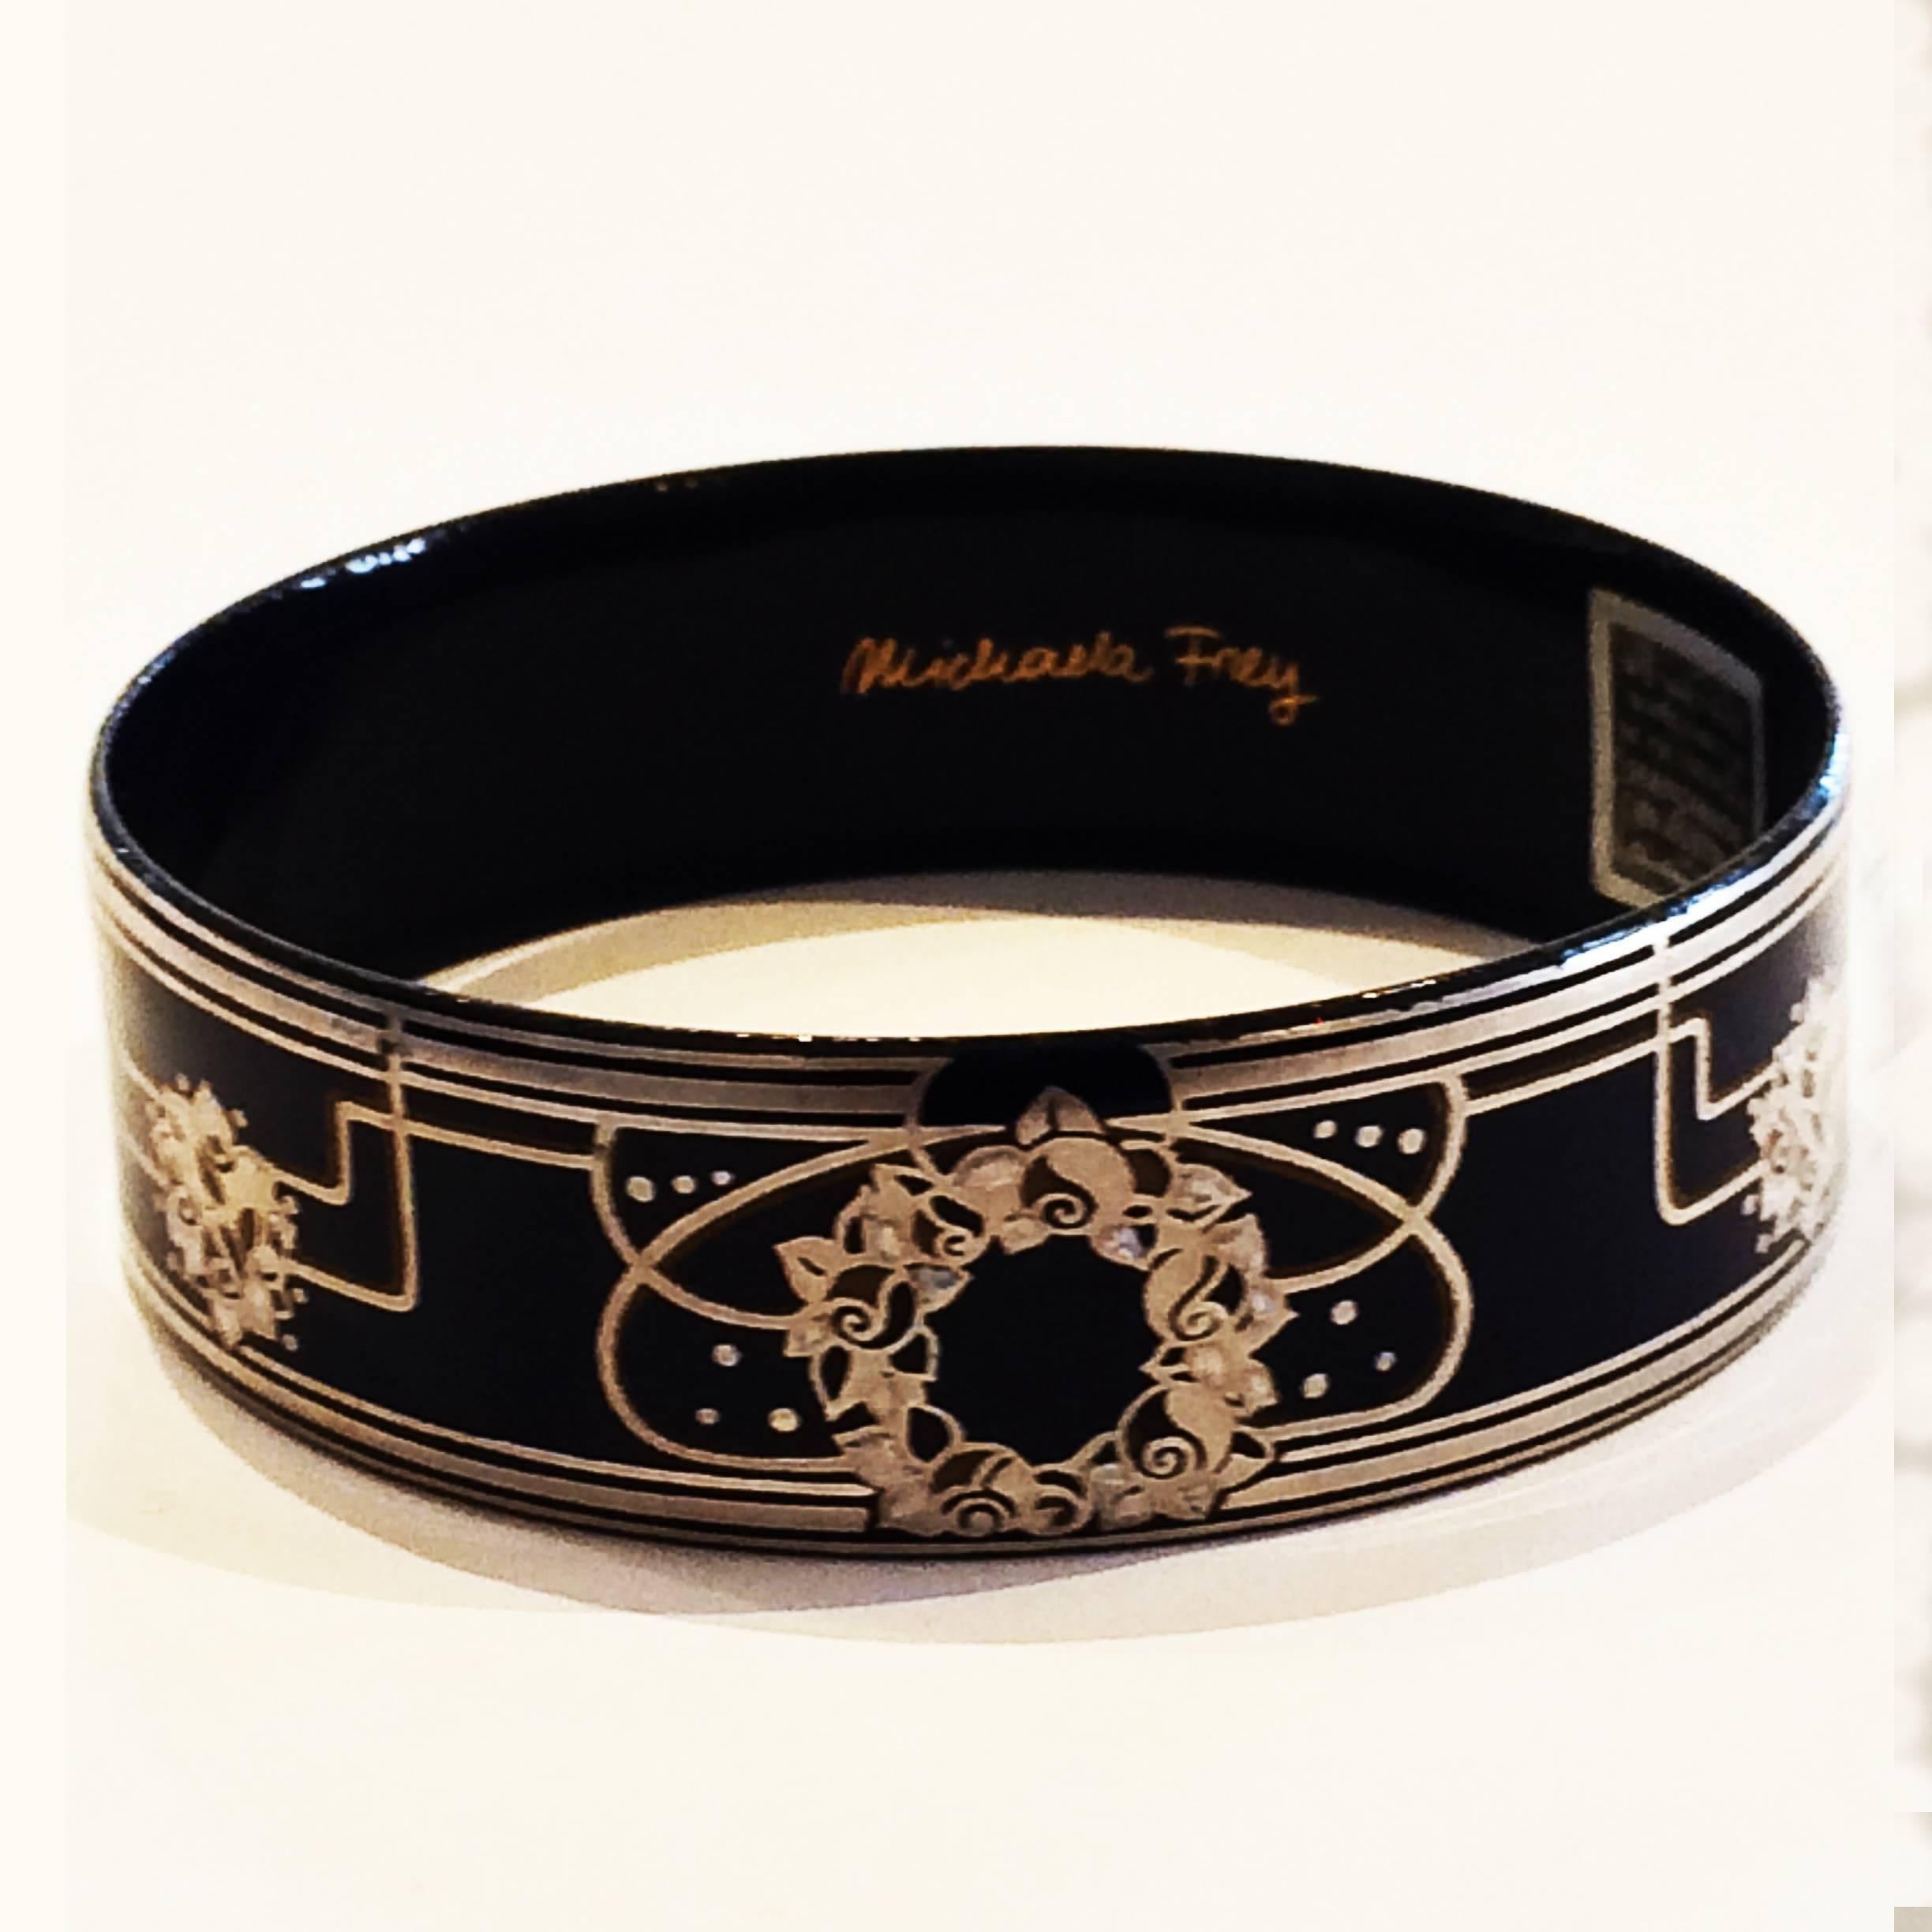 Mid Century, Bangle, Fine Silver Inlaid by Michaela Frey. A delicate design in Florals, with Silver banding, loops and dots with an Art Nouveau Influence. All in perfect condition, still retaining the original Manufacturer sticker to the inside